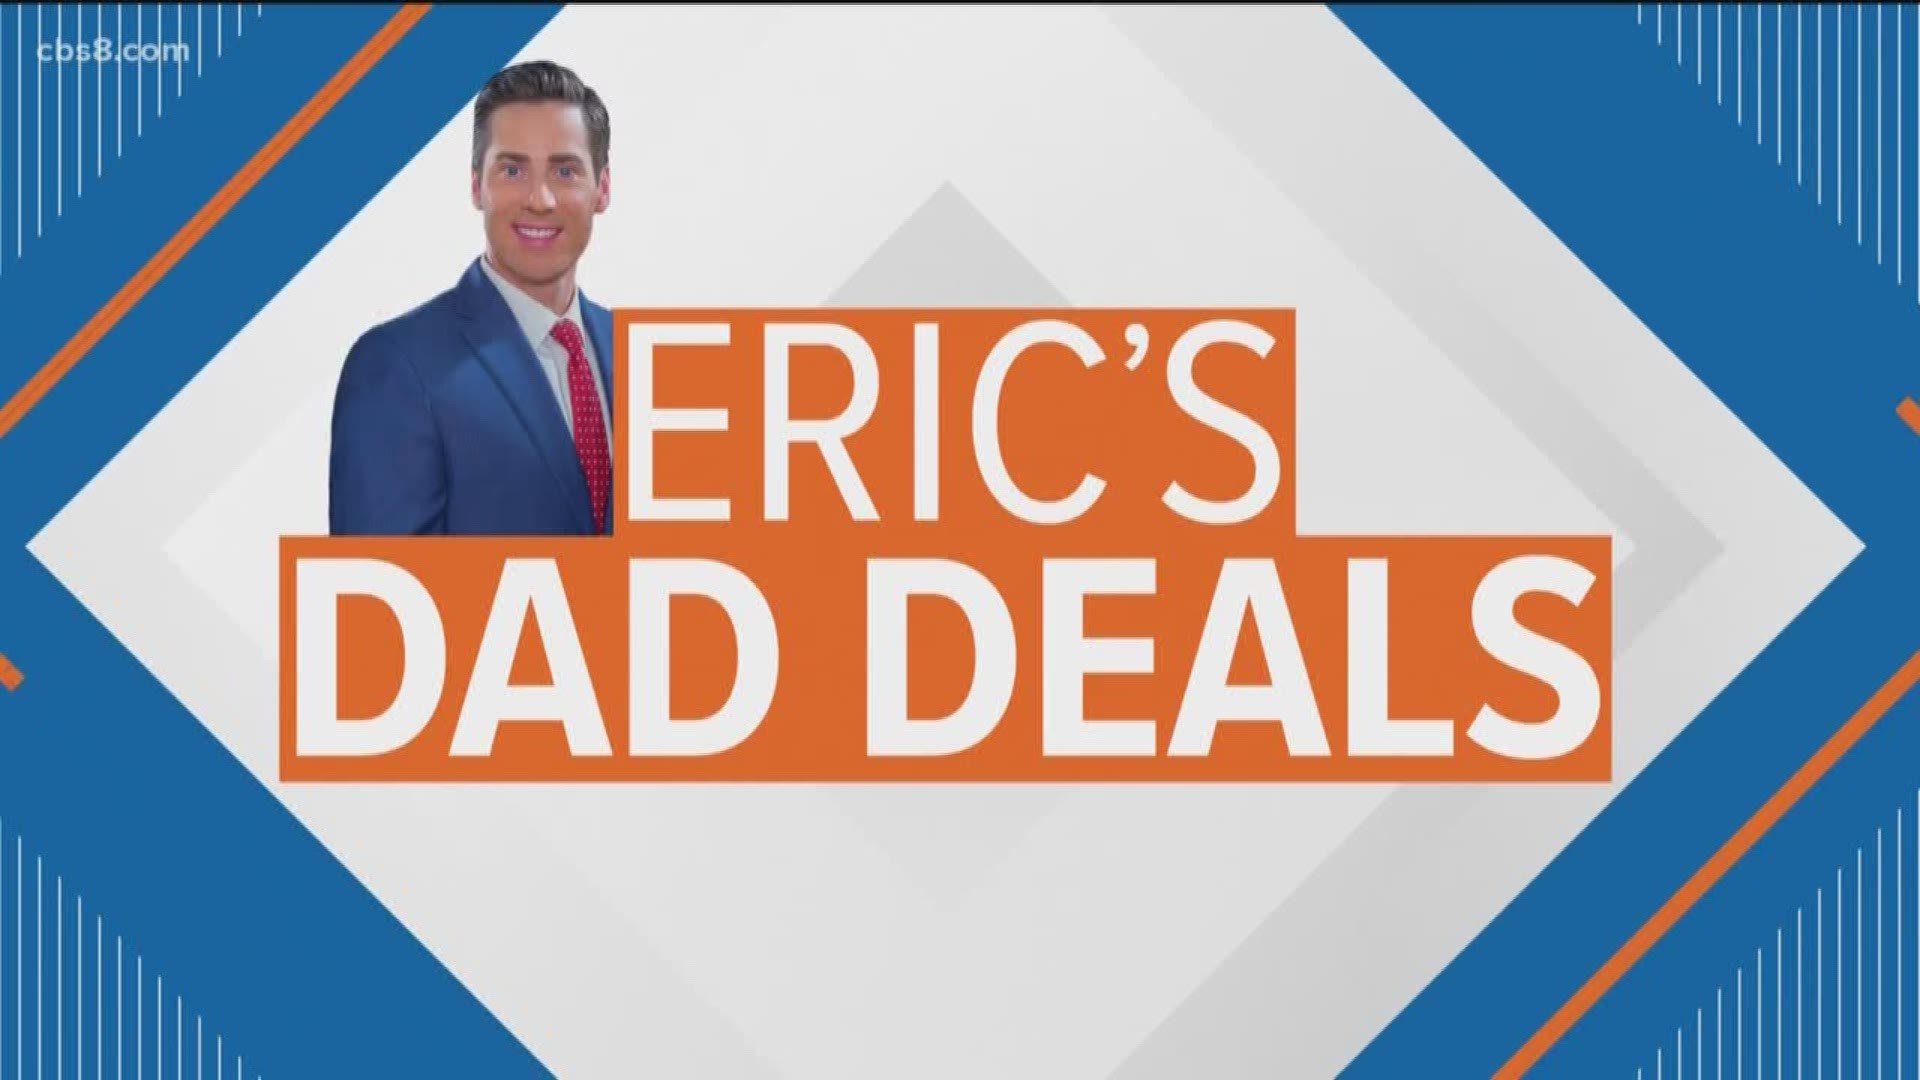 Eric has some of the best deals offered during Prime Day at Amazon, Target & Walmart.